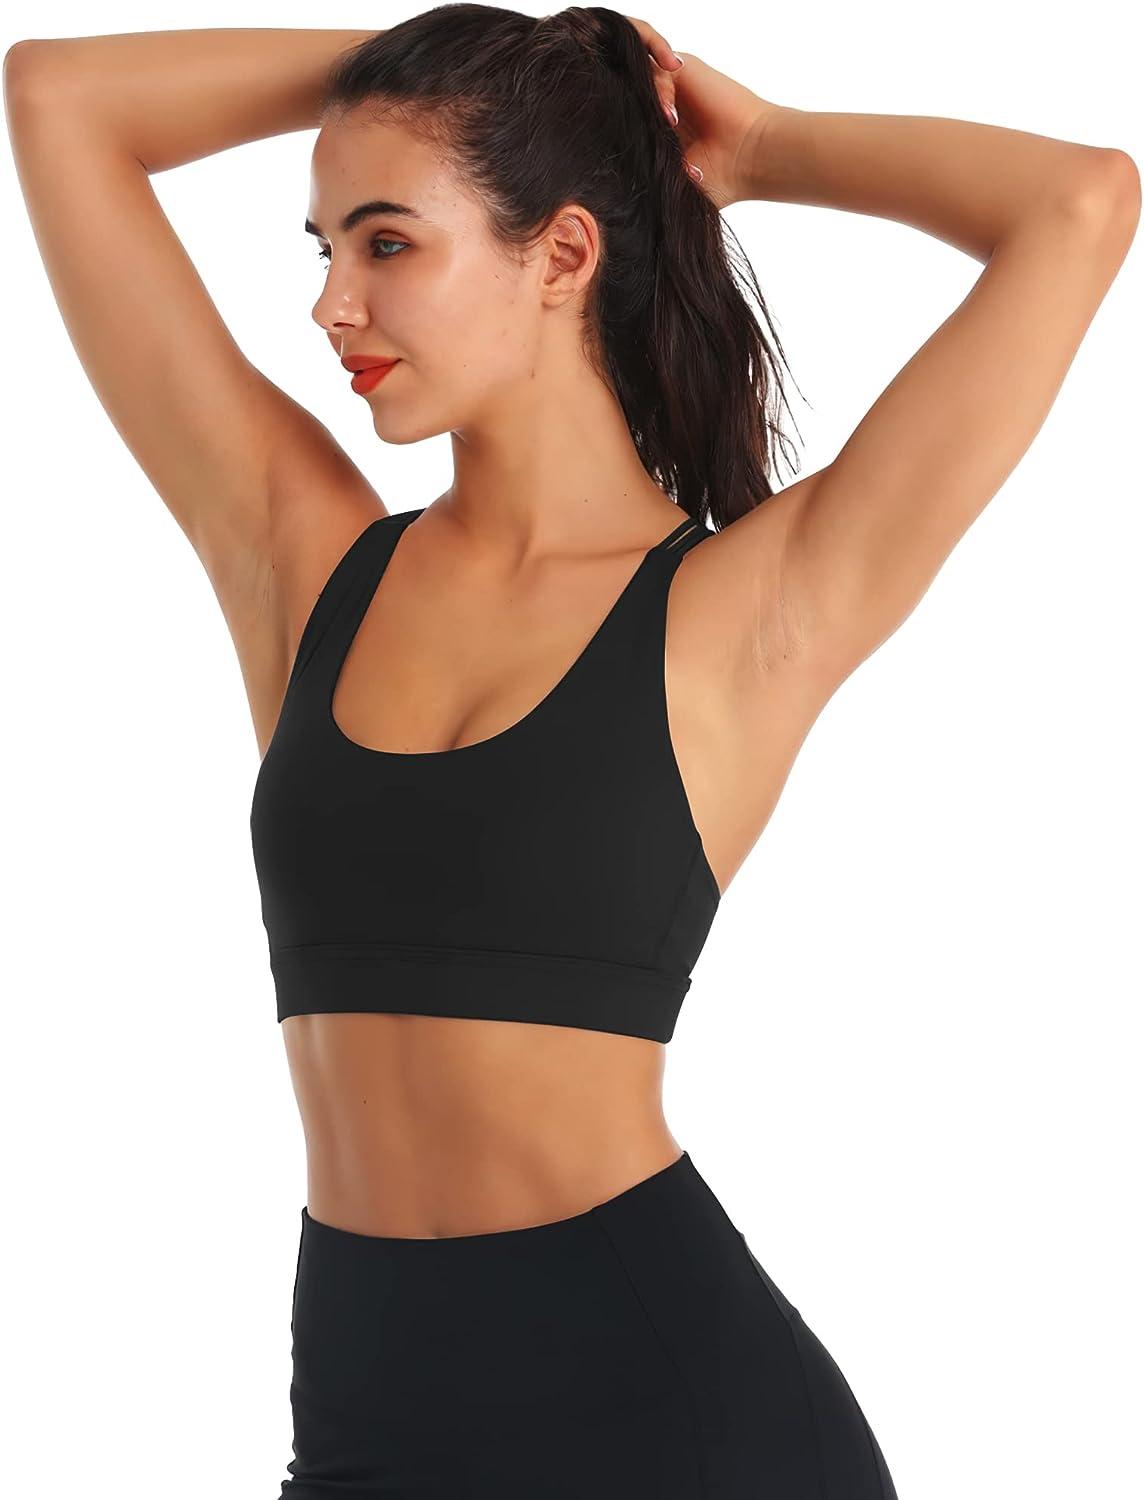 OYANUS Womens Summer Workout Tops Sexy Backless Yoga Shirts Open Back  Activewear Running Sports Gym Quick Dry Tank Tops Large Z01-black